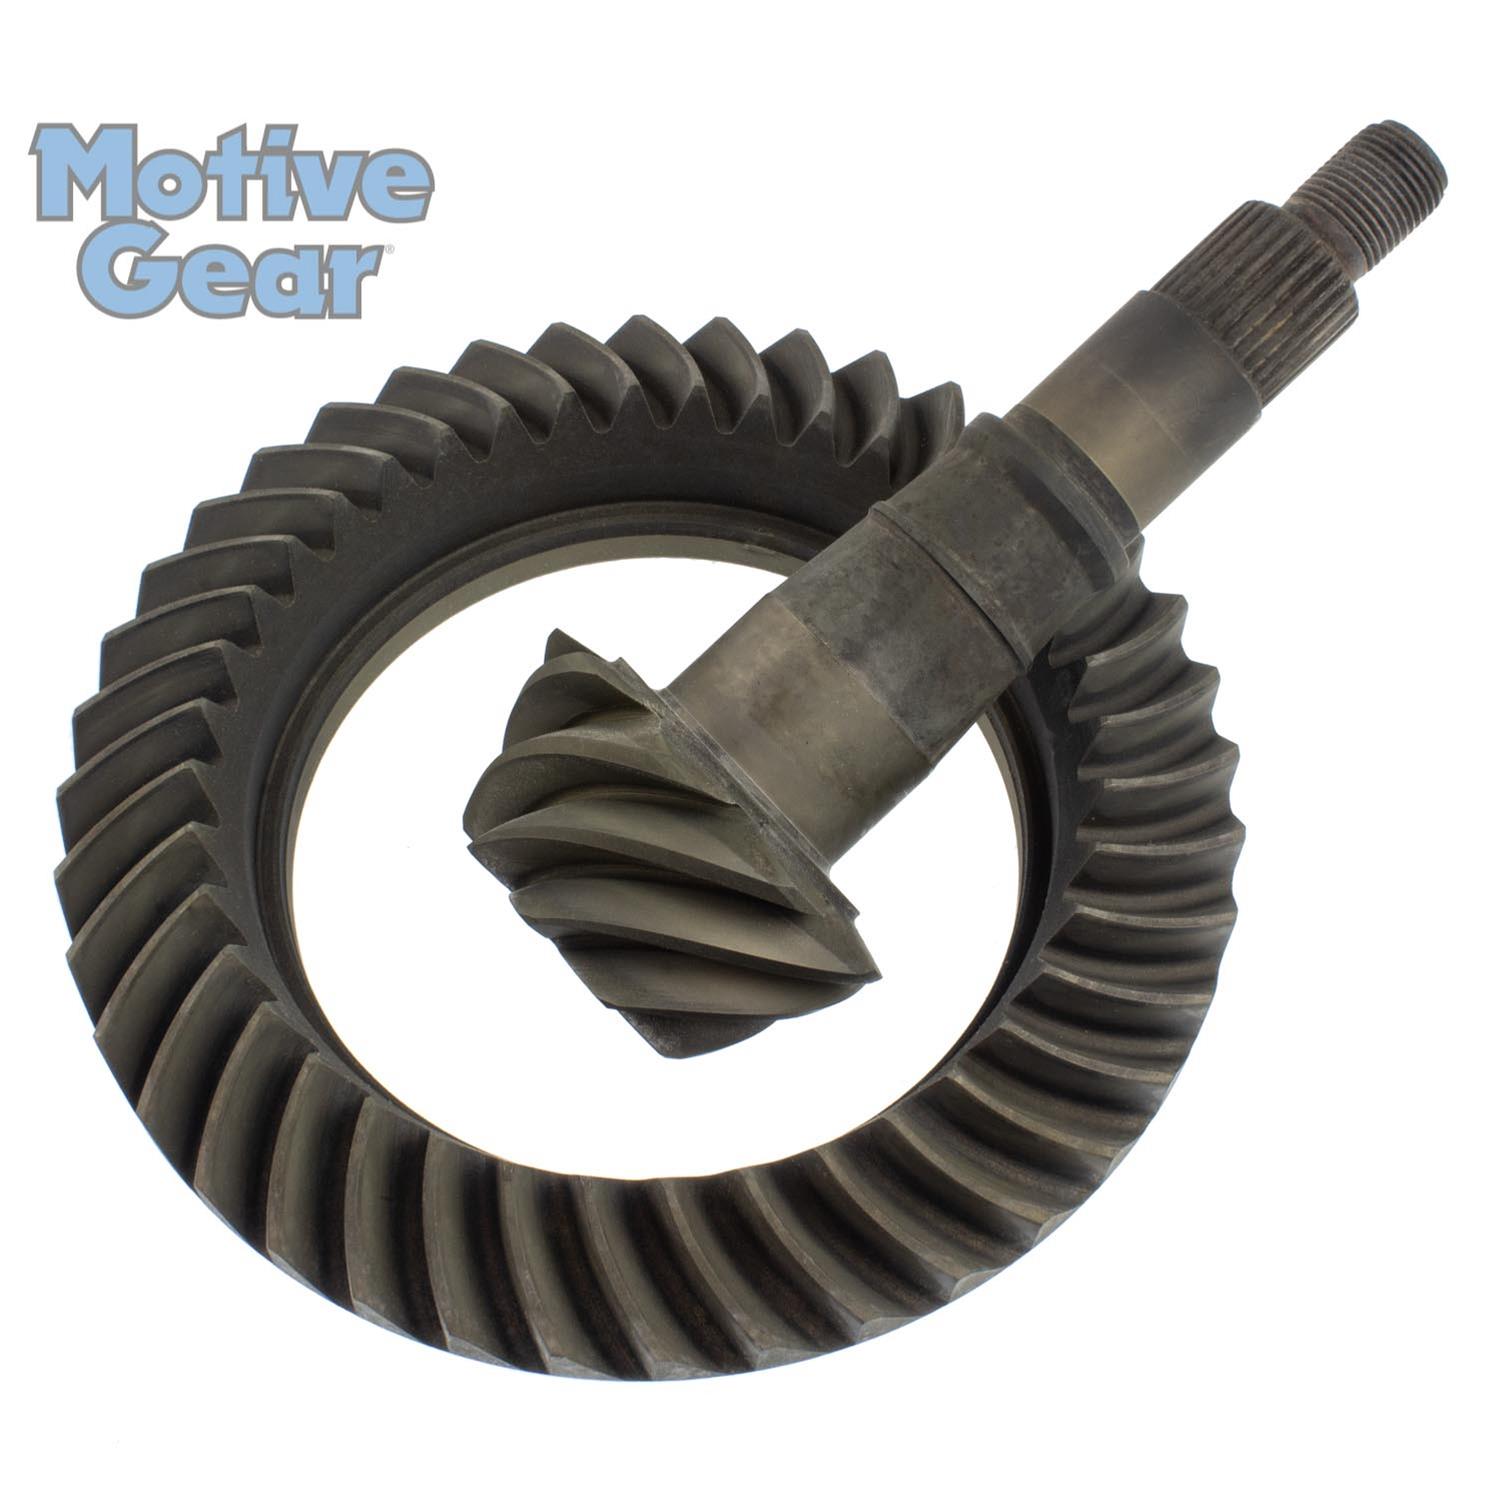 Motive Gear C9.25-444F-2 4.44 Ratio Differential Ring and Pinion for 9.25 (Inch) (12 Bolt)